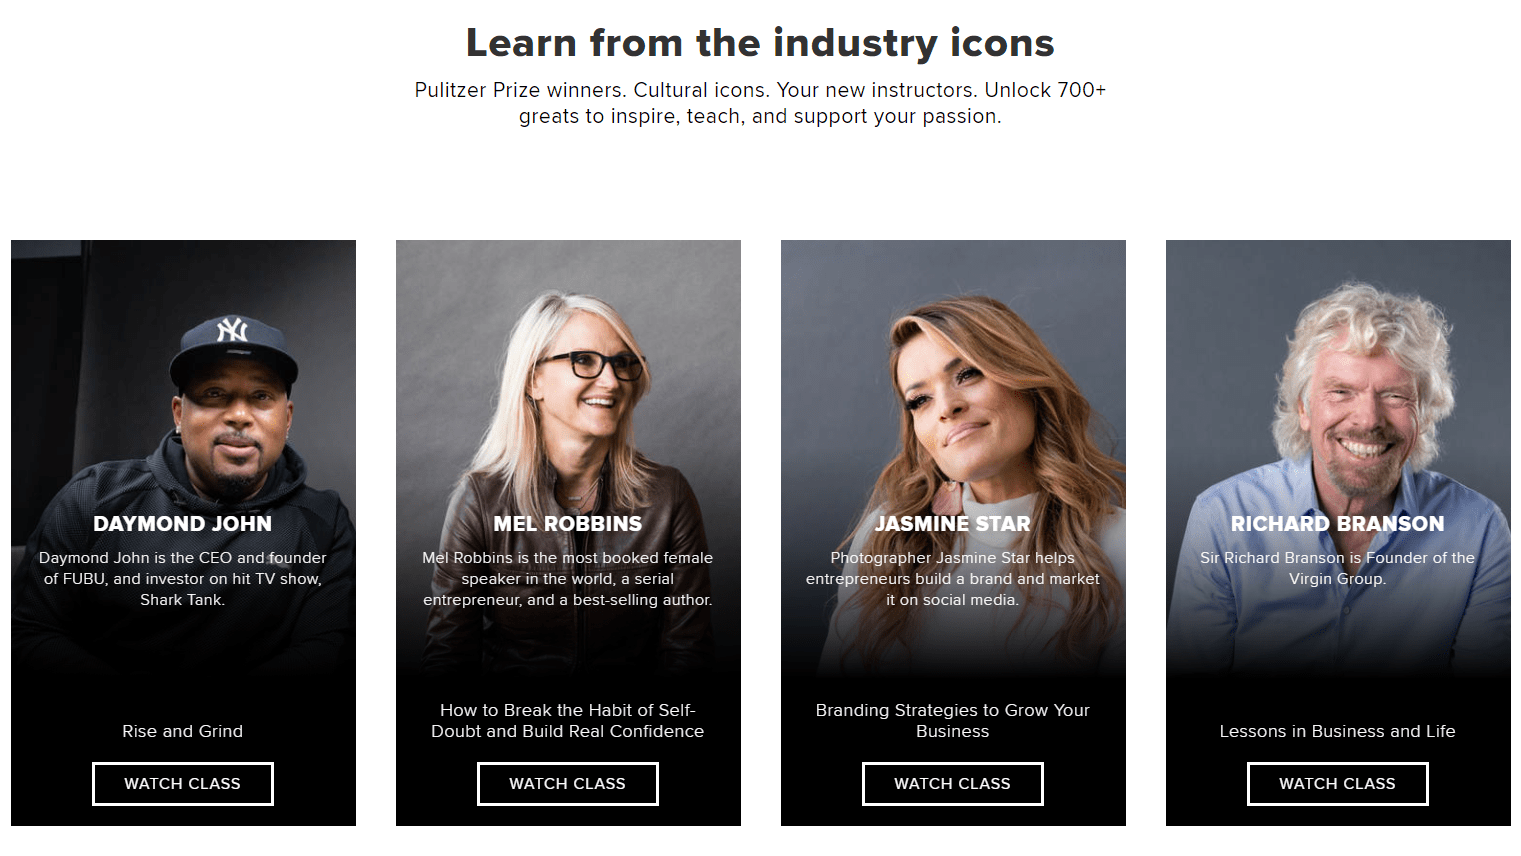 Learn from the industry icons